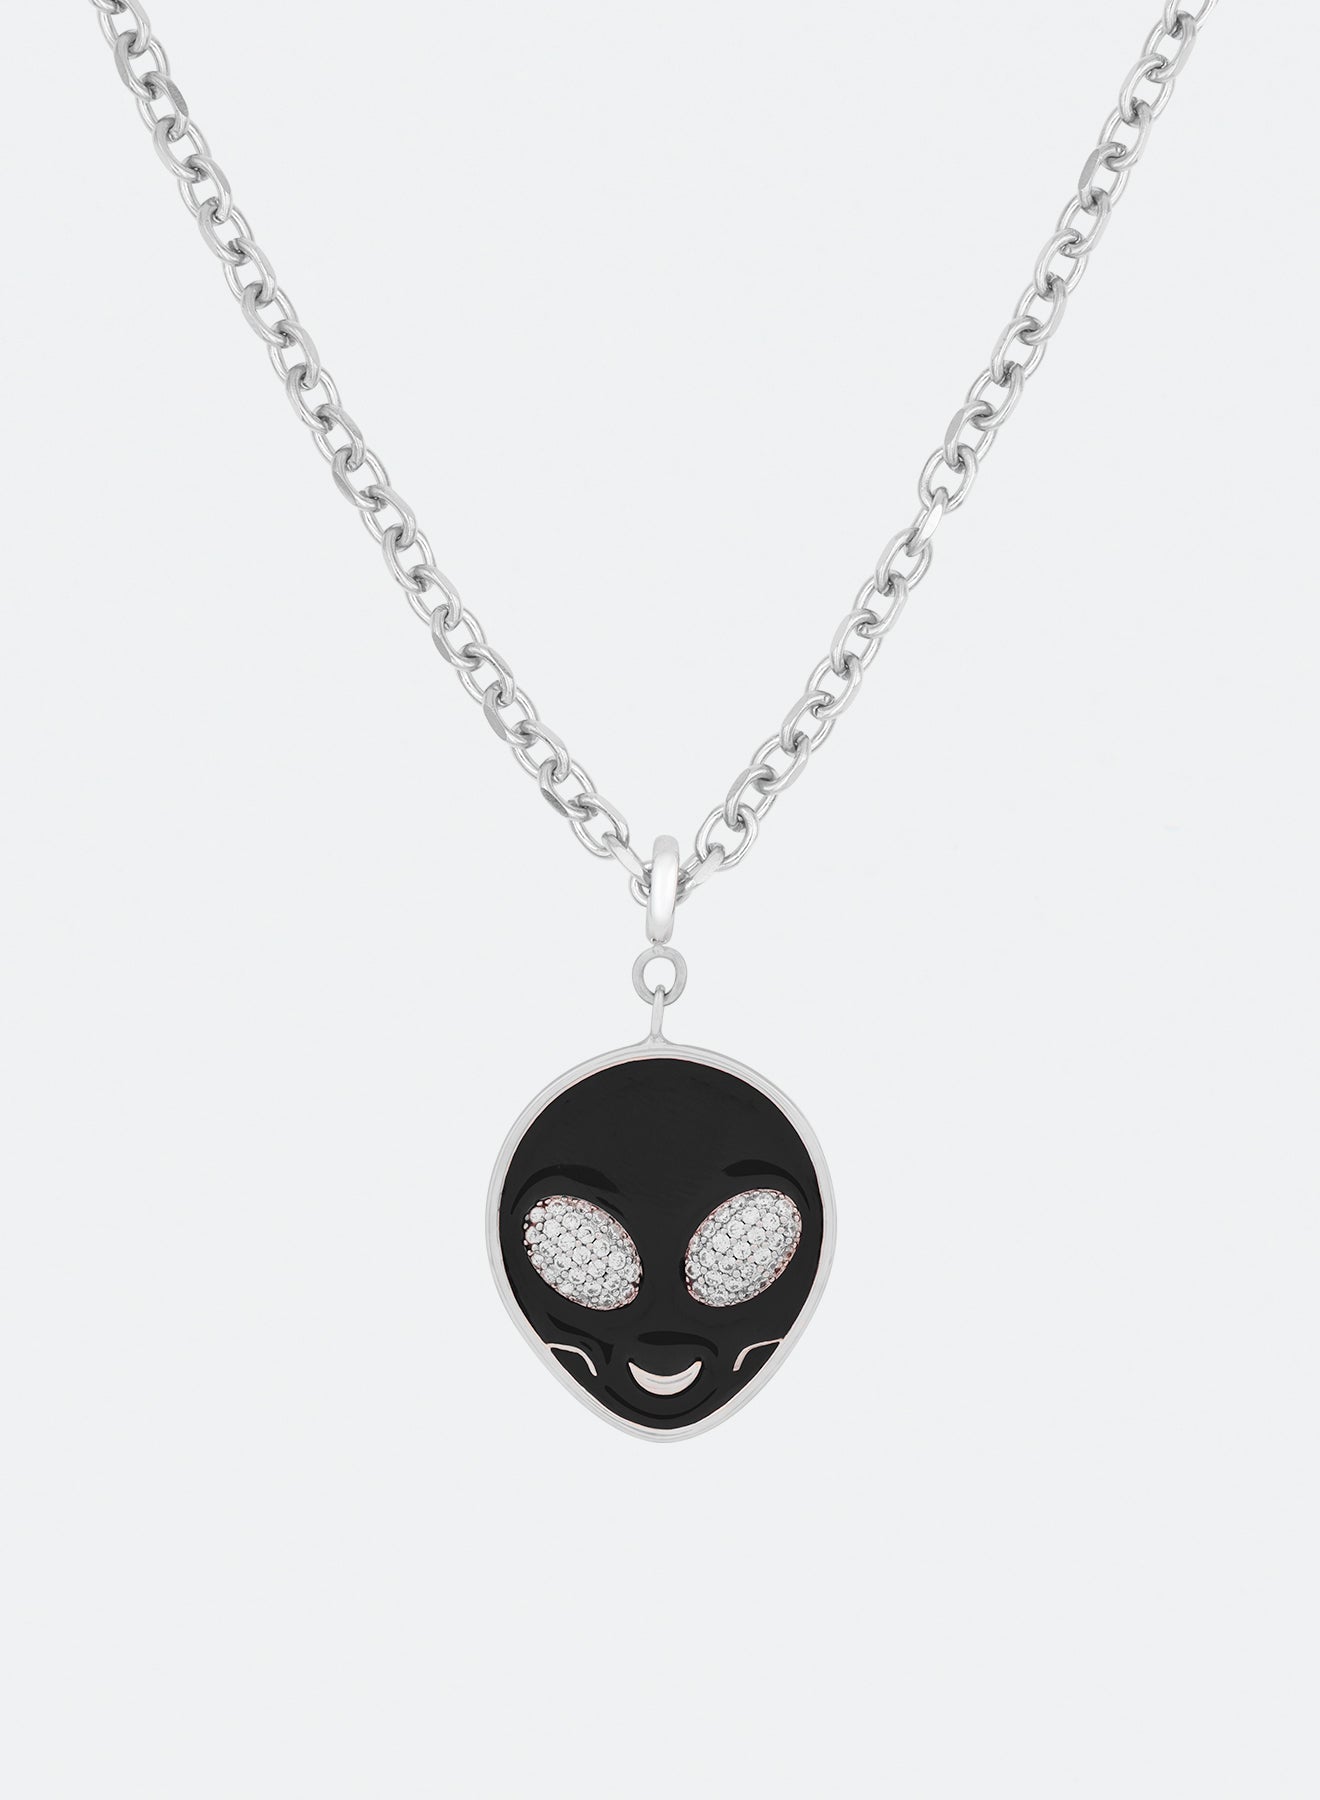 18k white gold coated alien pendant necklace with hand-set micropavé stones in white on black hand painted alien pendant and 3mm rolo chain